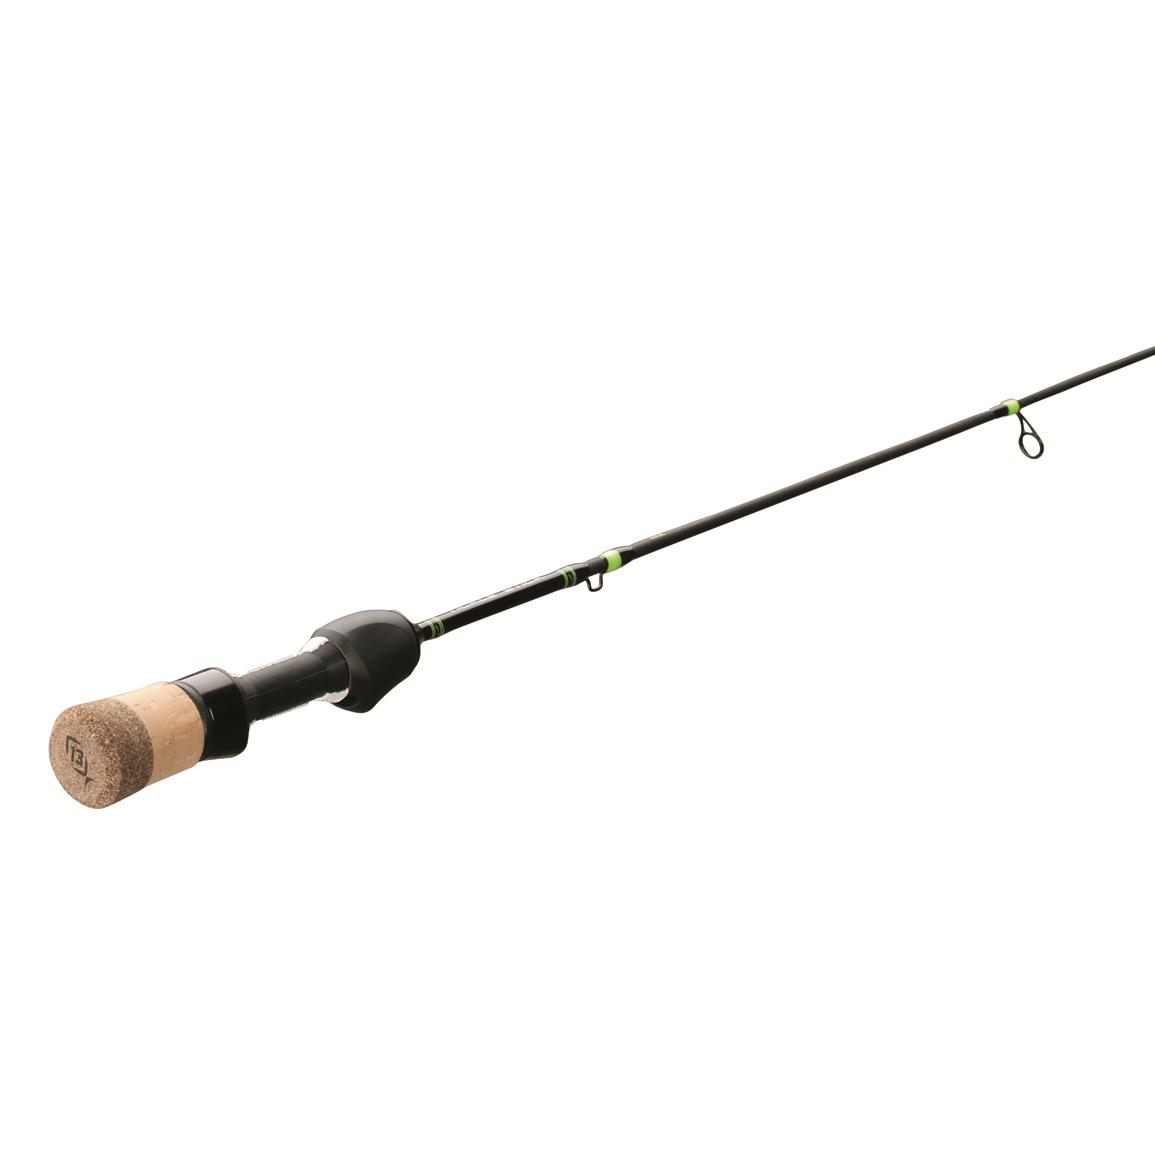 St. Croix Mojo Series Ice Fishing Rod, 34, Heavy Power - 723872, Ice  Fishing Rods at Sportsman's Guide